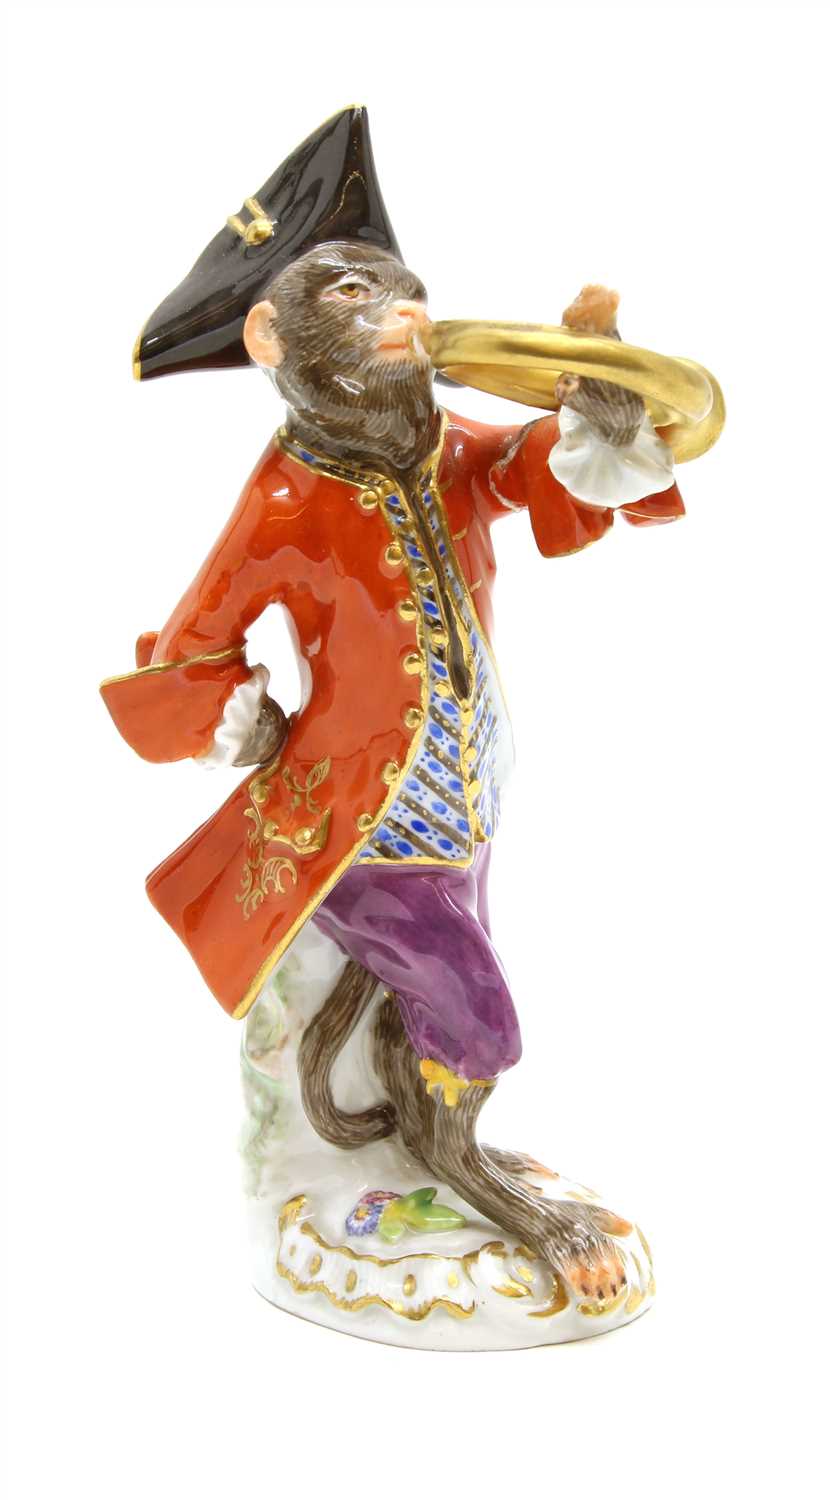 Lot 94 - A Meissen porcelain monkey band figure playing the French horn